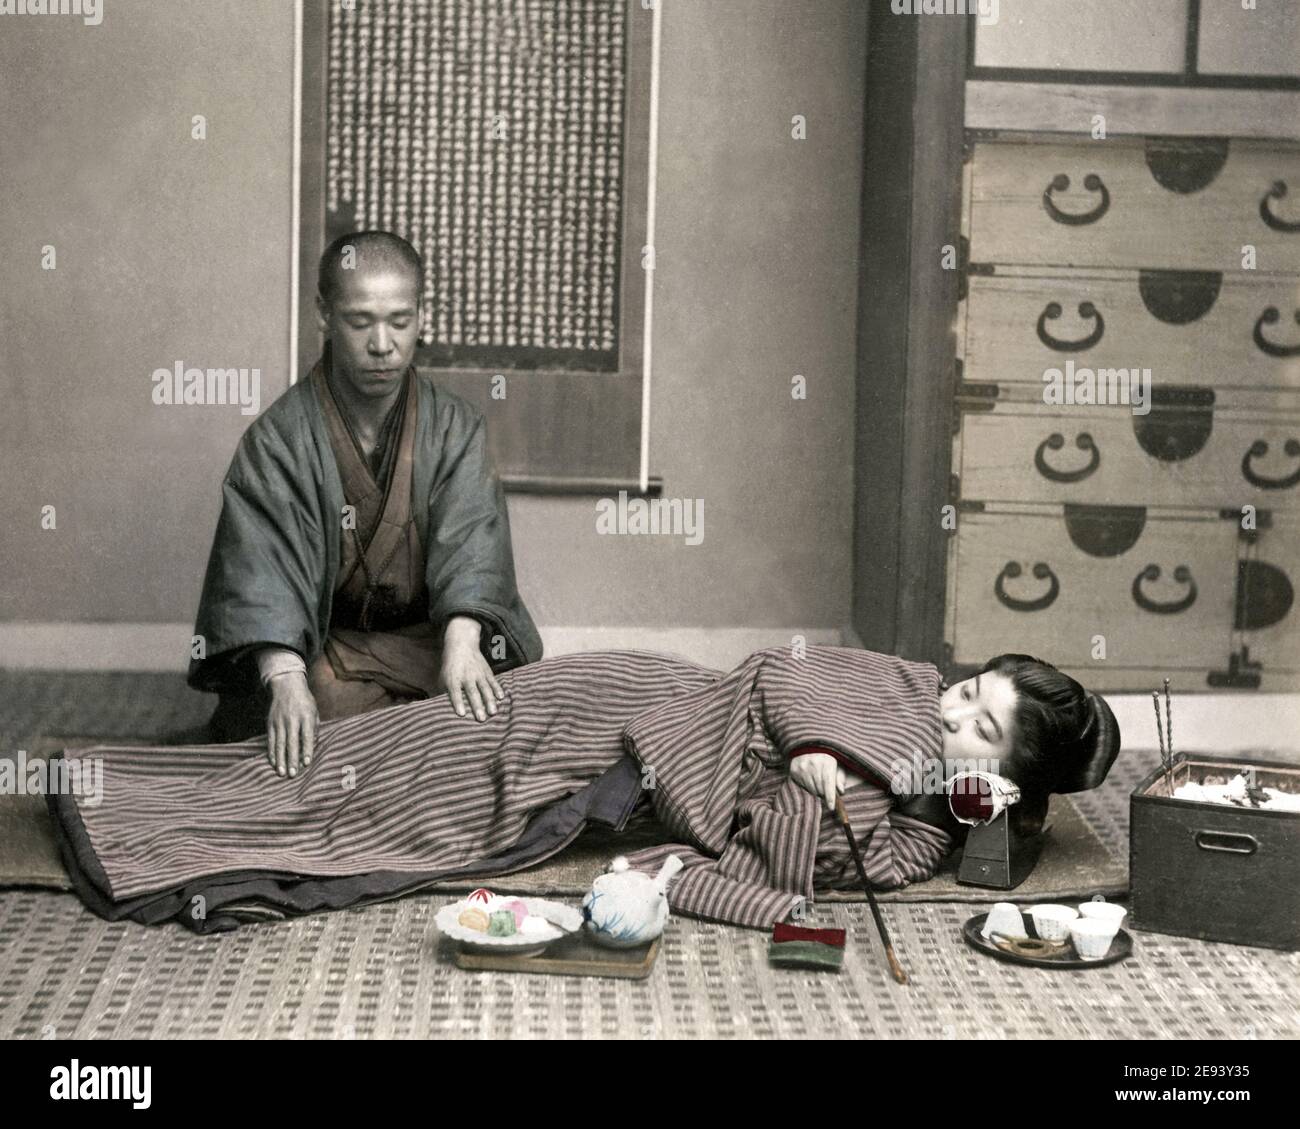 Late 19th century photograph - Doctor and Patient, Japan Stock Photo